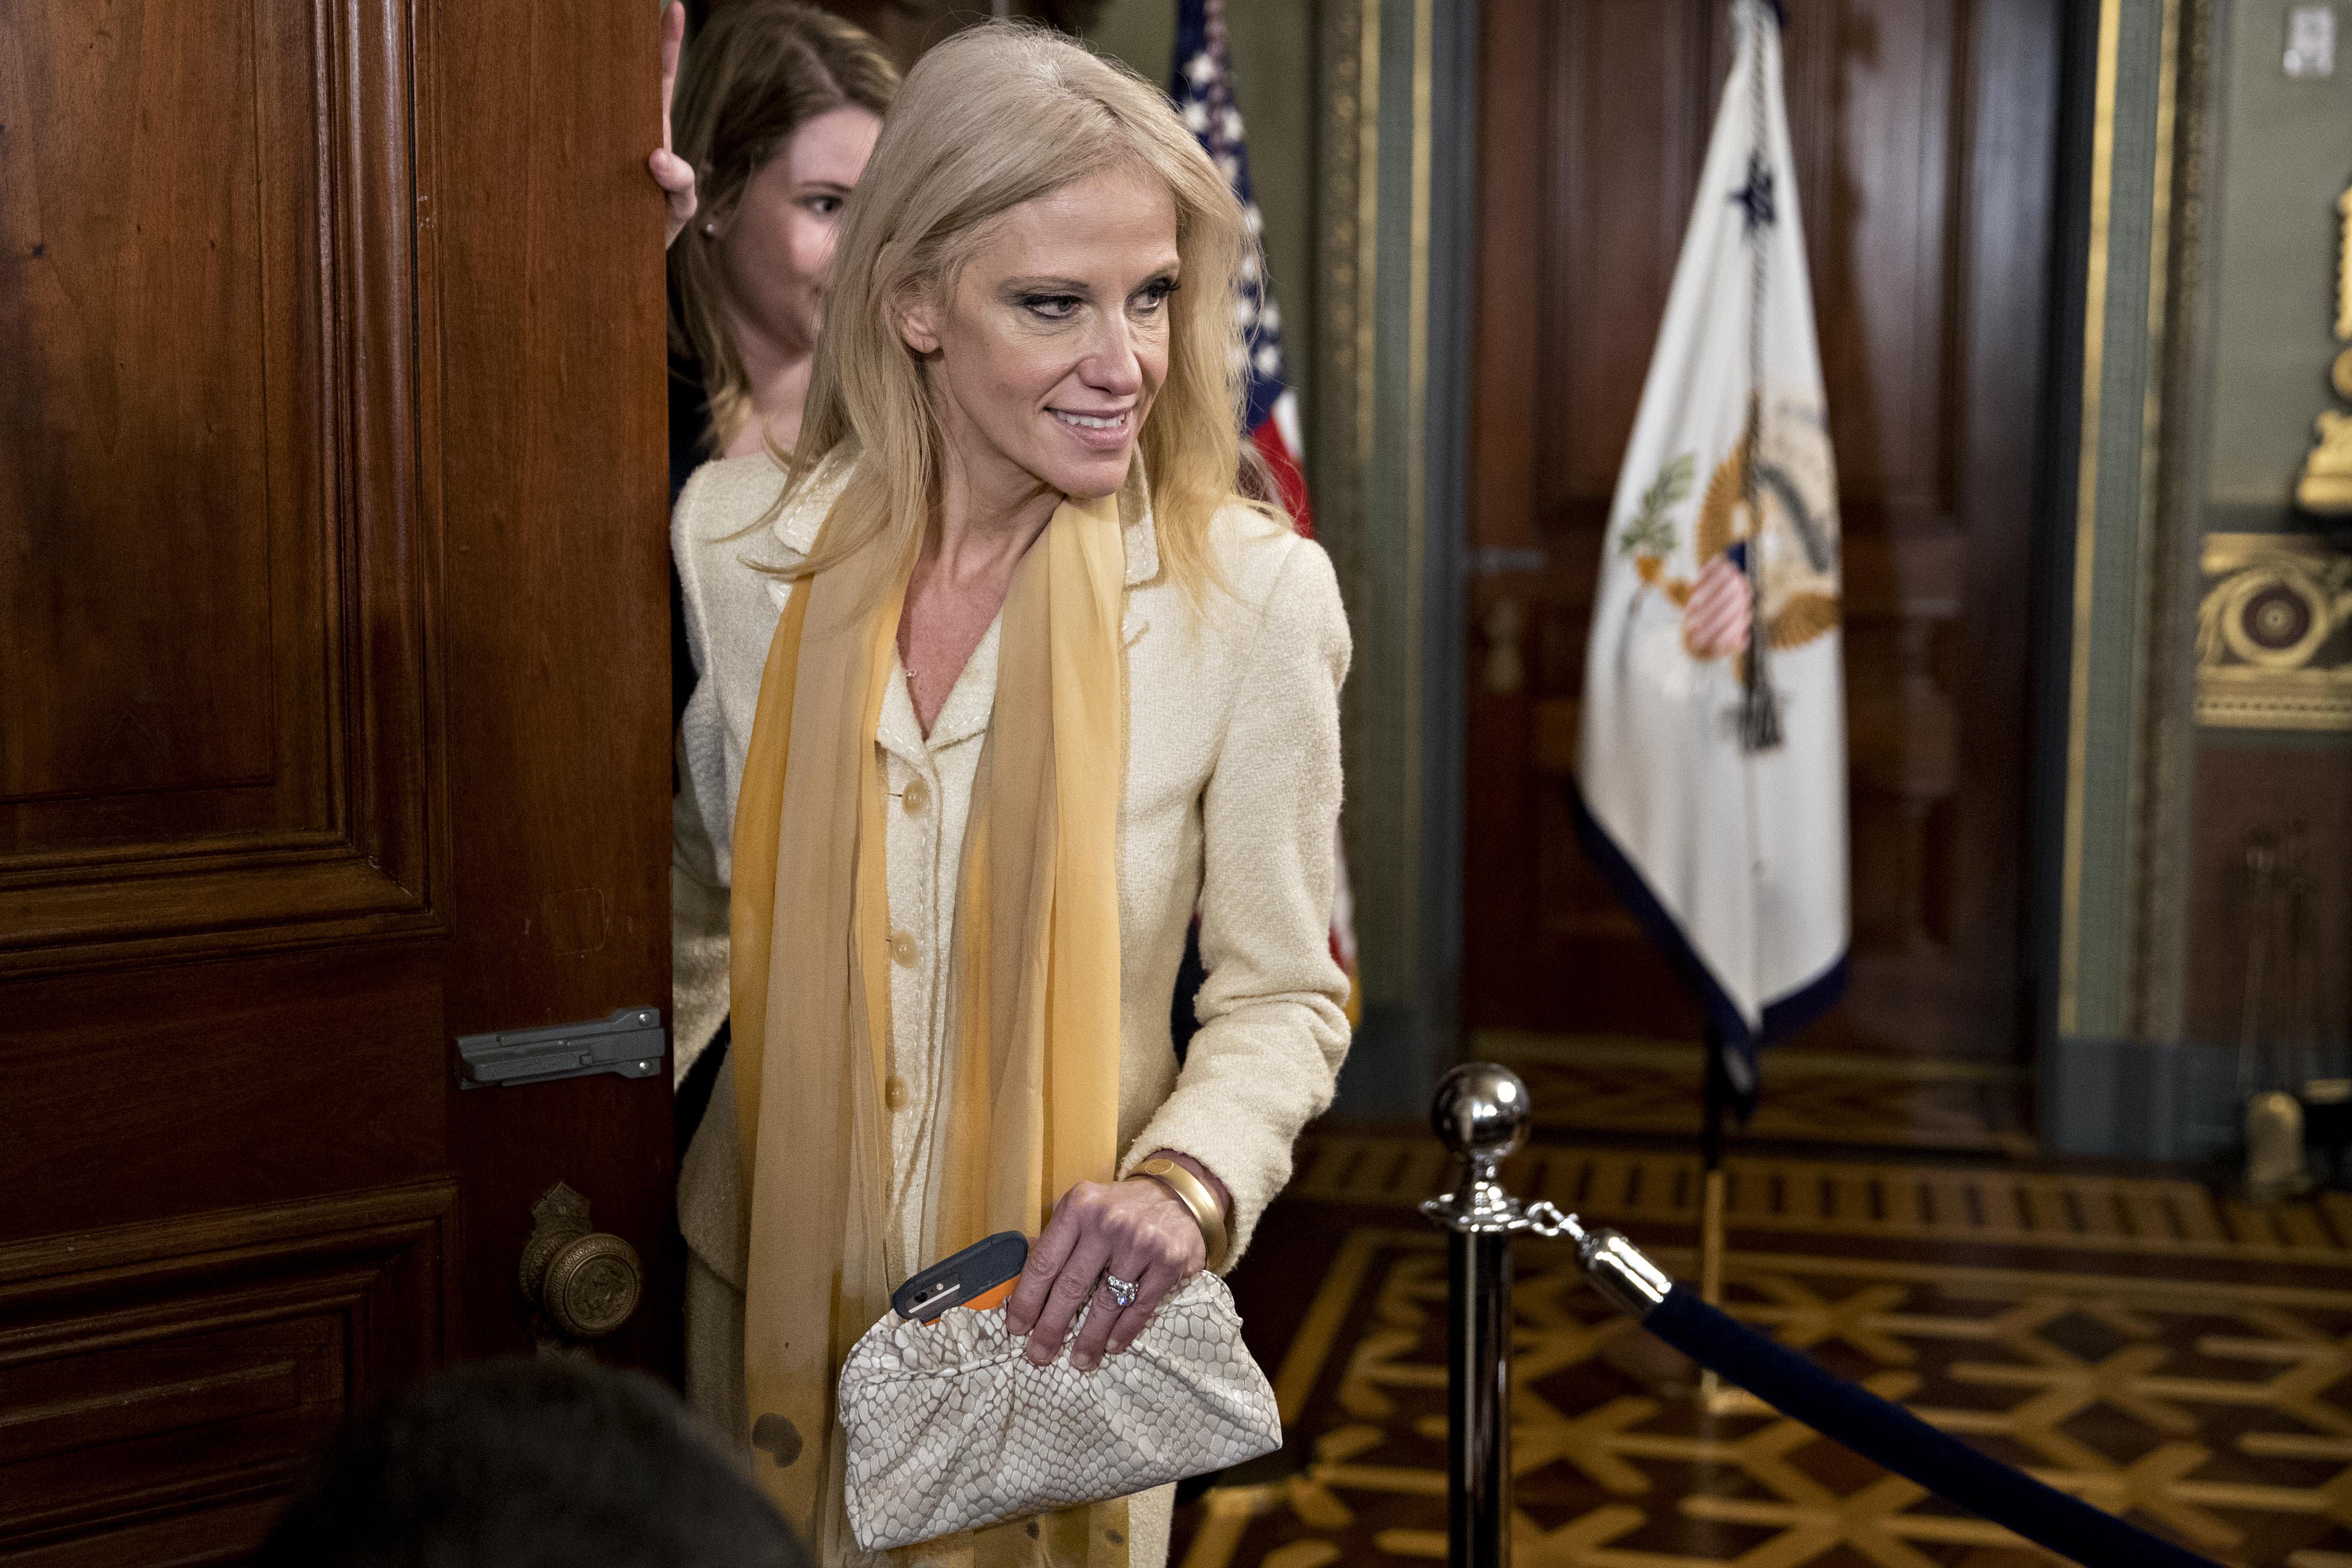 Kellyanne Conway, senior advisor to President Donald Trump, arrives to attend the swearing-in of Betsy DeVos, U.S. secretary of education, not pictured, inside the Vice President's Ceremonial Office in Washington, D.C., on Feb. 7, 2017. (Andrew Harrer—Bloomberg/Getty Images)